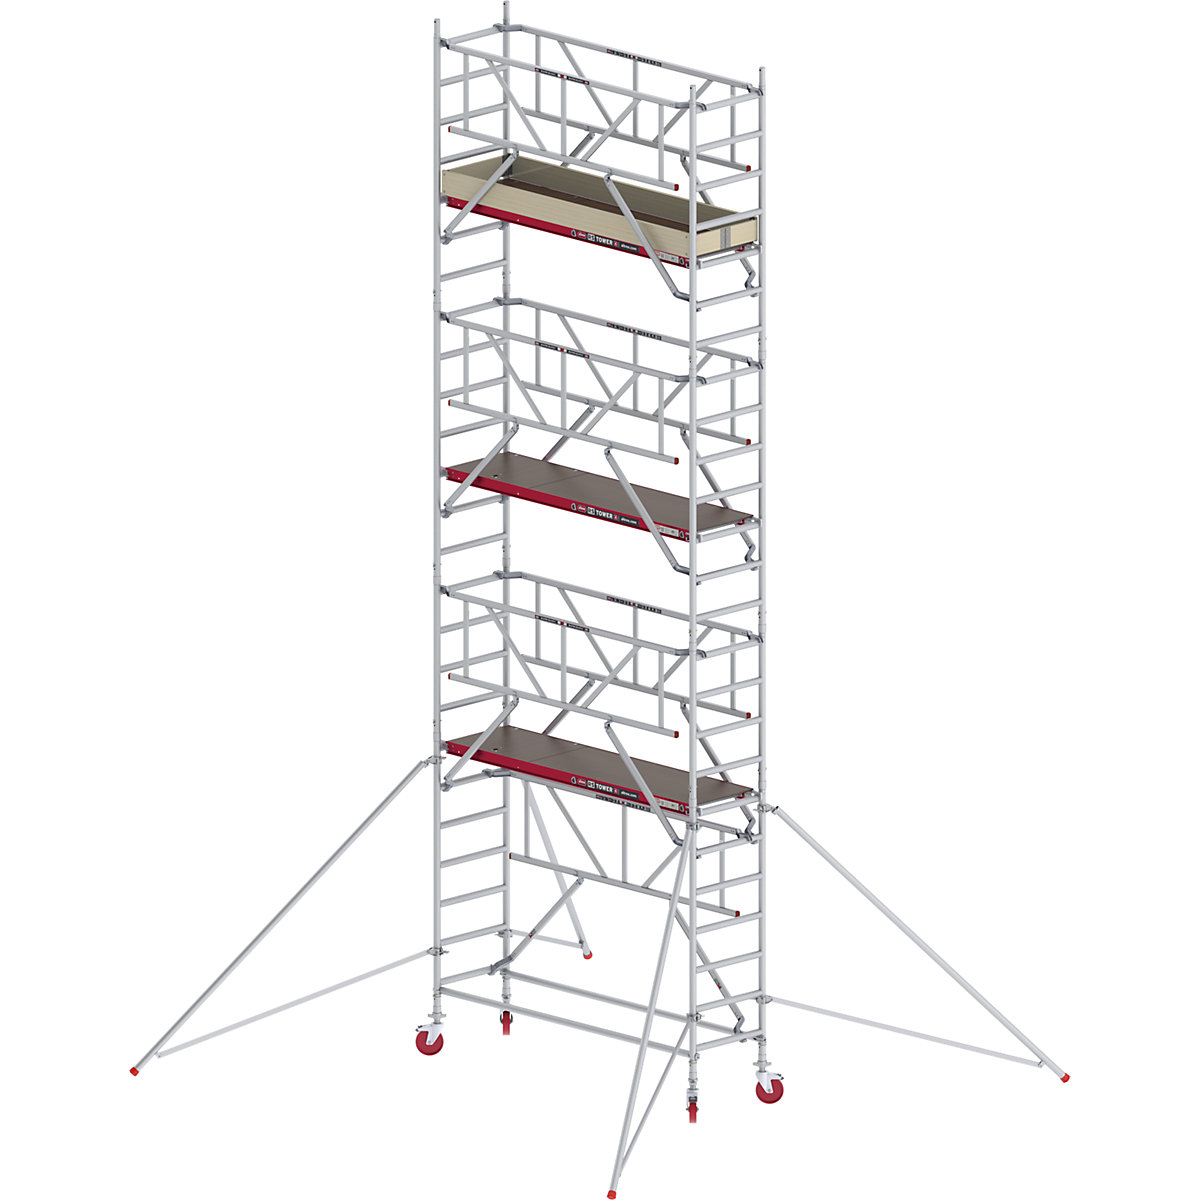 RS TOWER 41 slim mobile access tower with Safe-Quick® – Altrex, wooden platform, length 1.85 m, working height 8.20 m-3